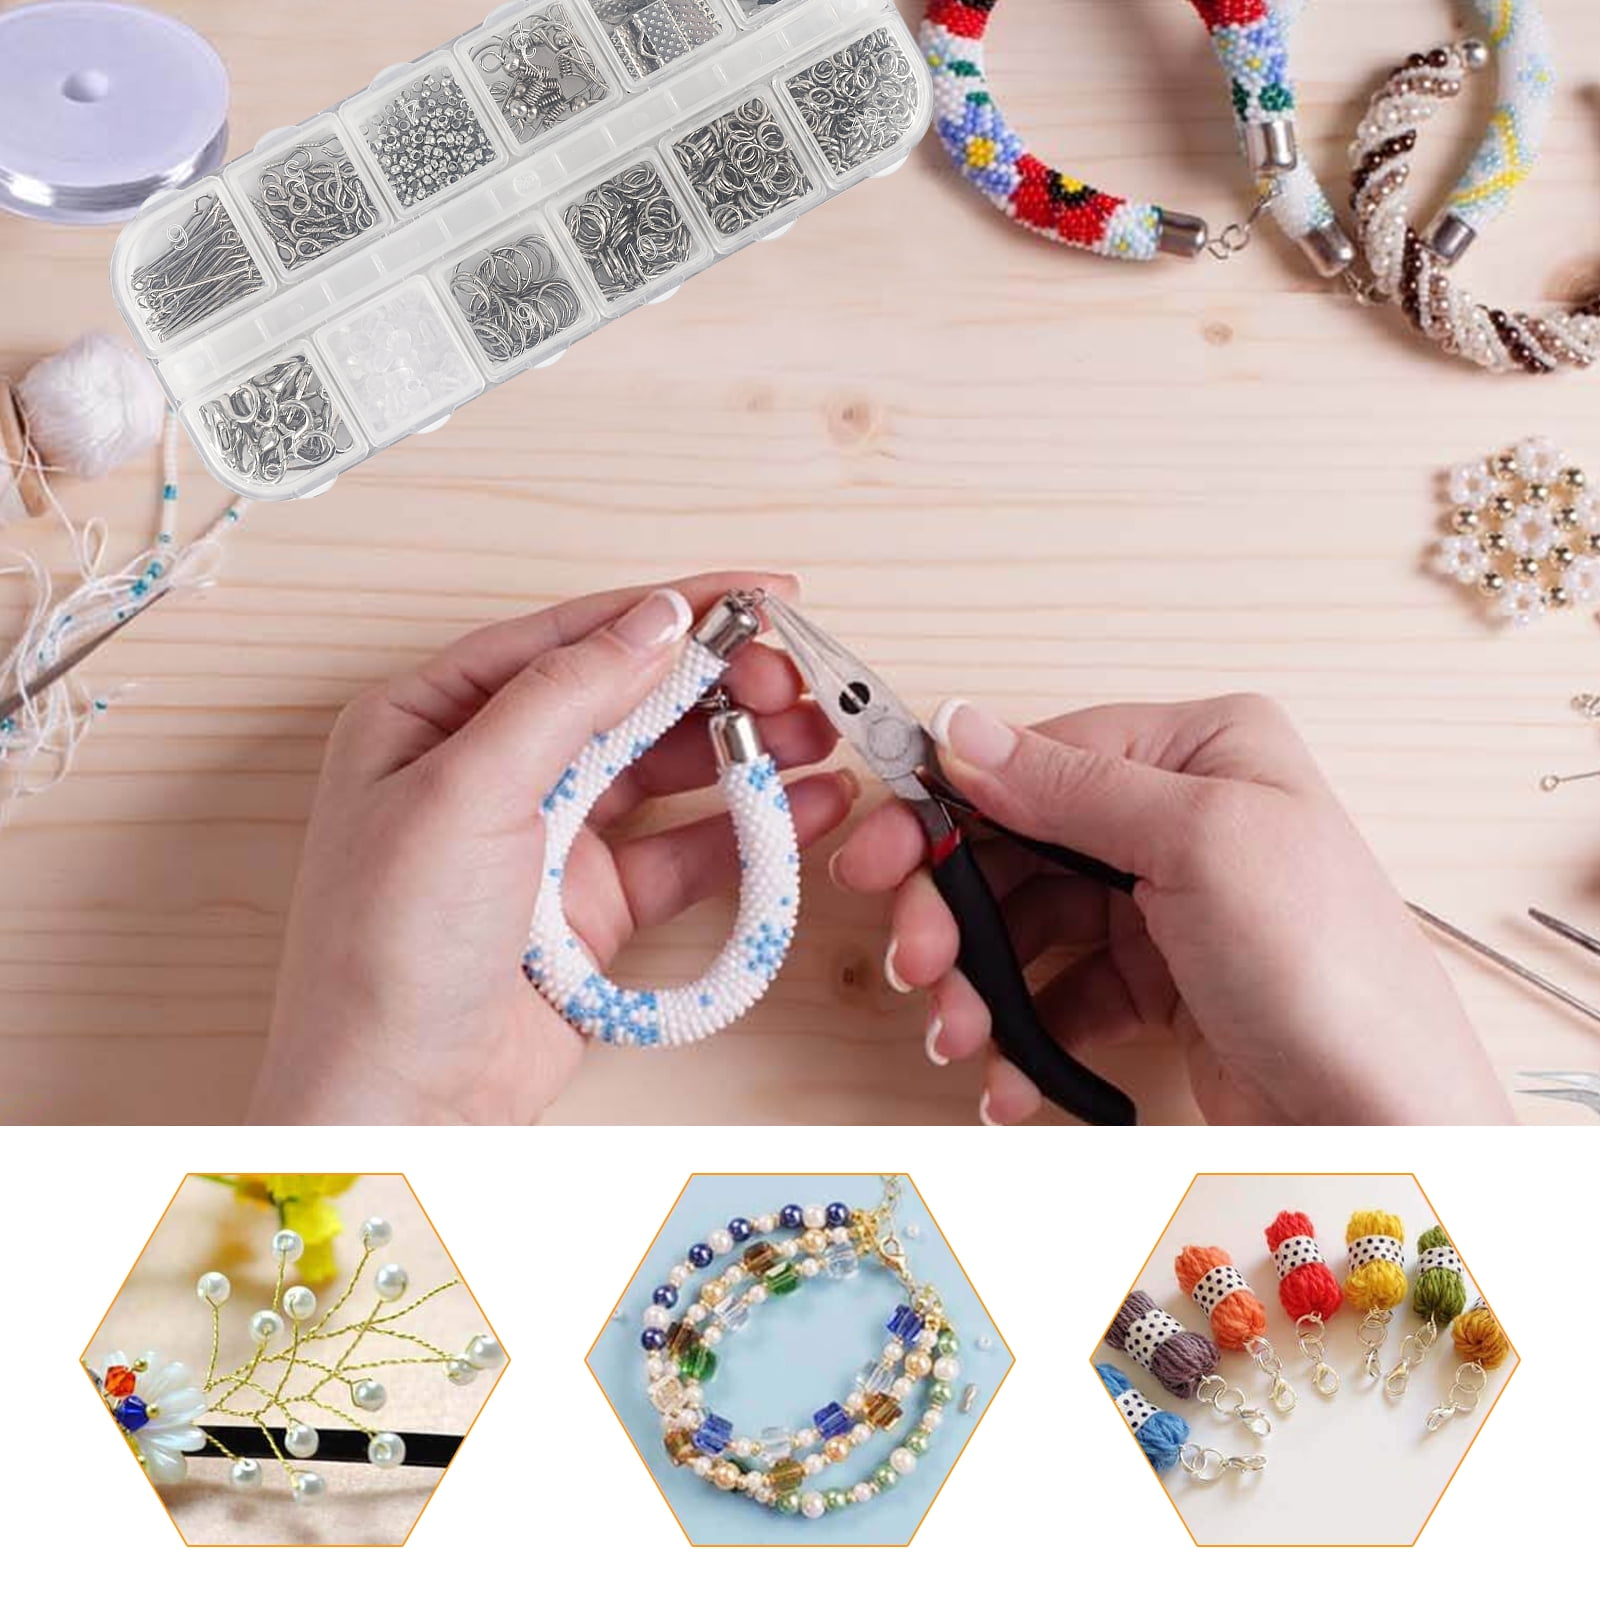 How to Pick Tools for Beaded Jewelry - FeltMagnet